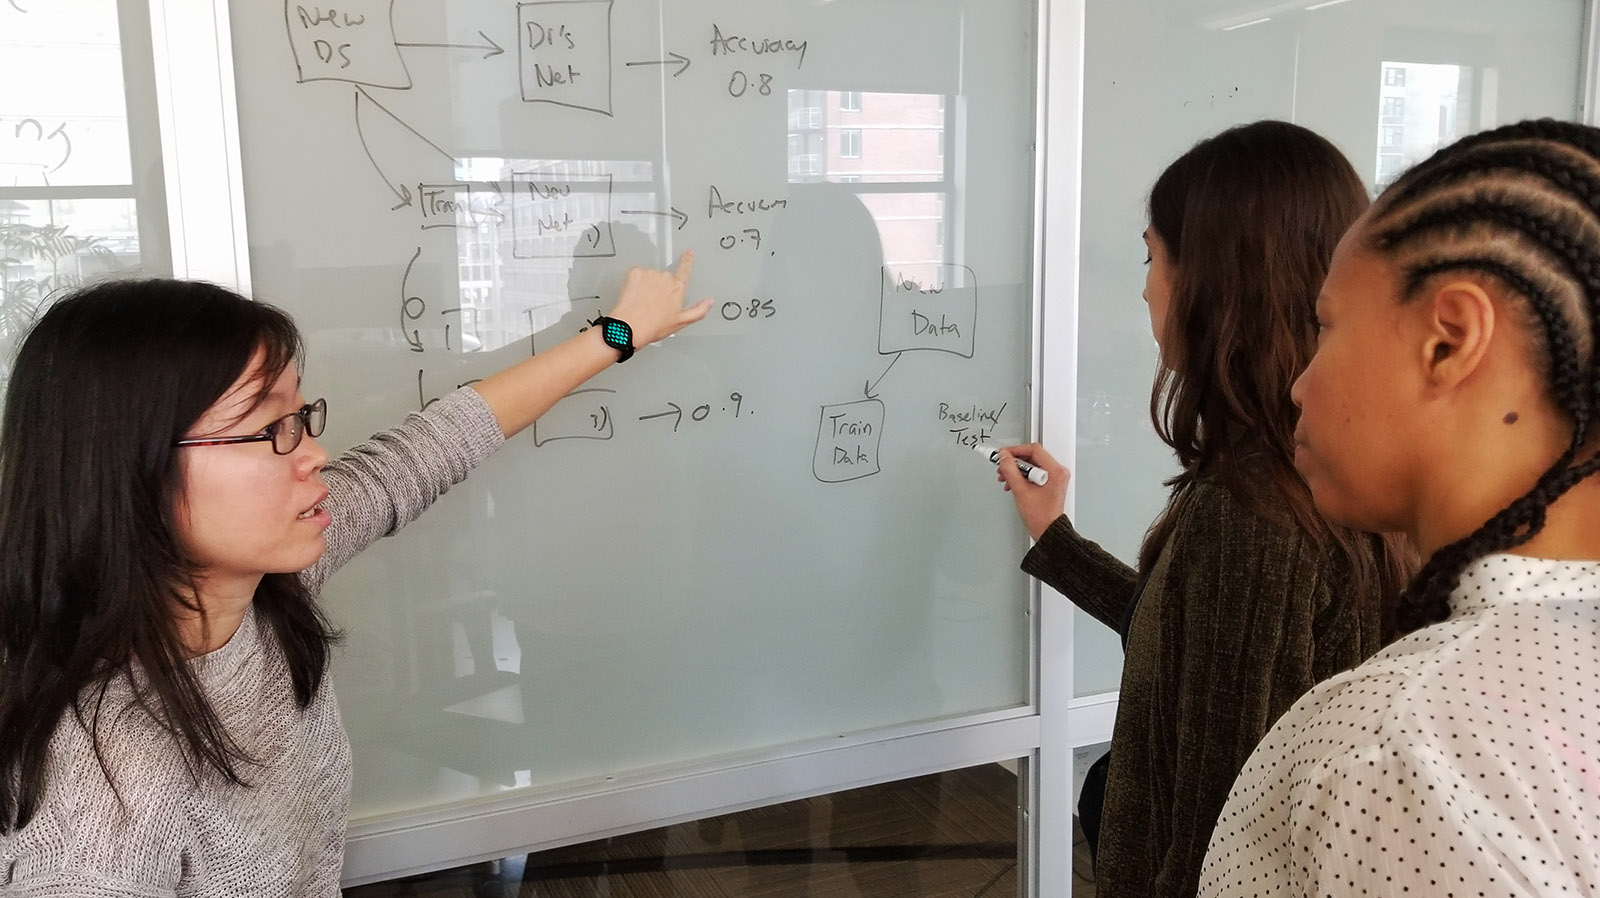 People pointing at a whiteboard with references to neural nets on it